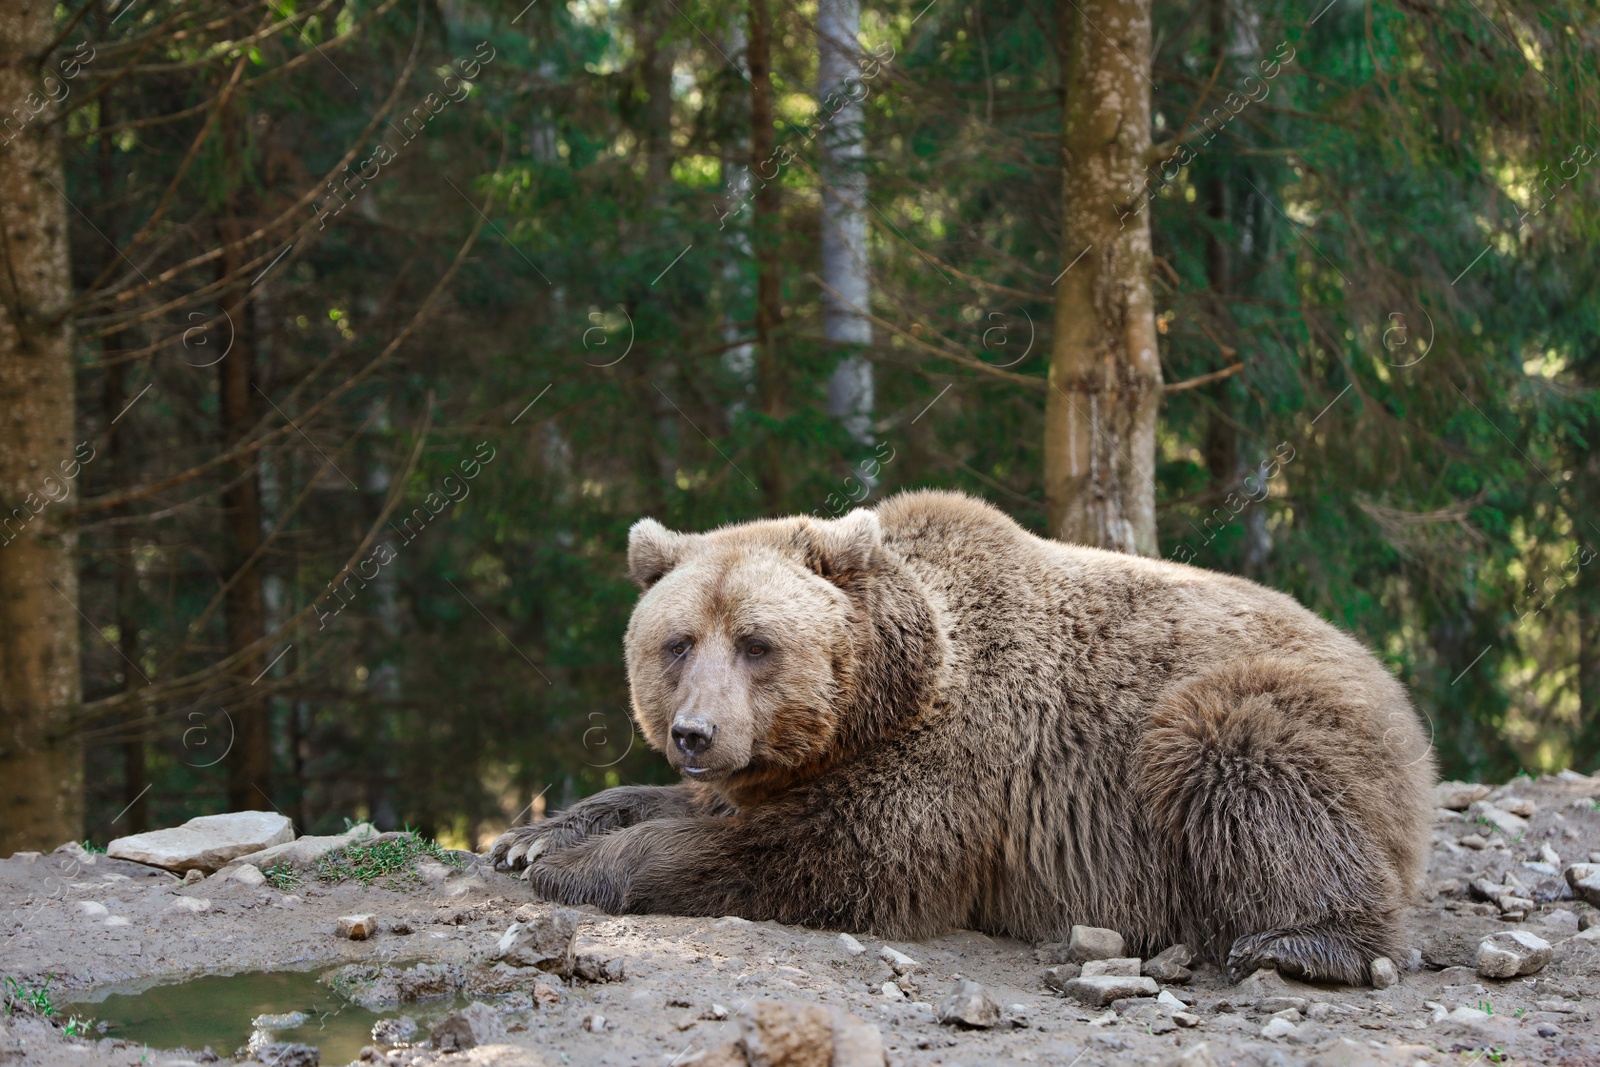 Photo of Beige bear in forest, space for text. Wild animal